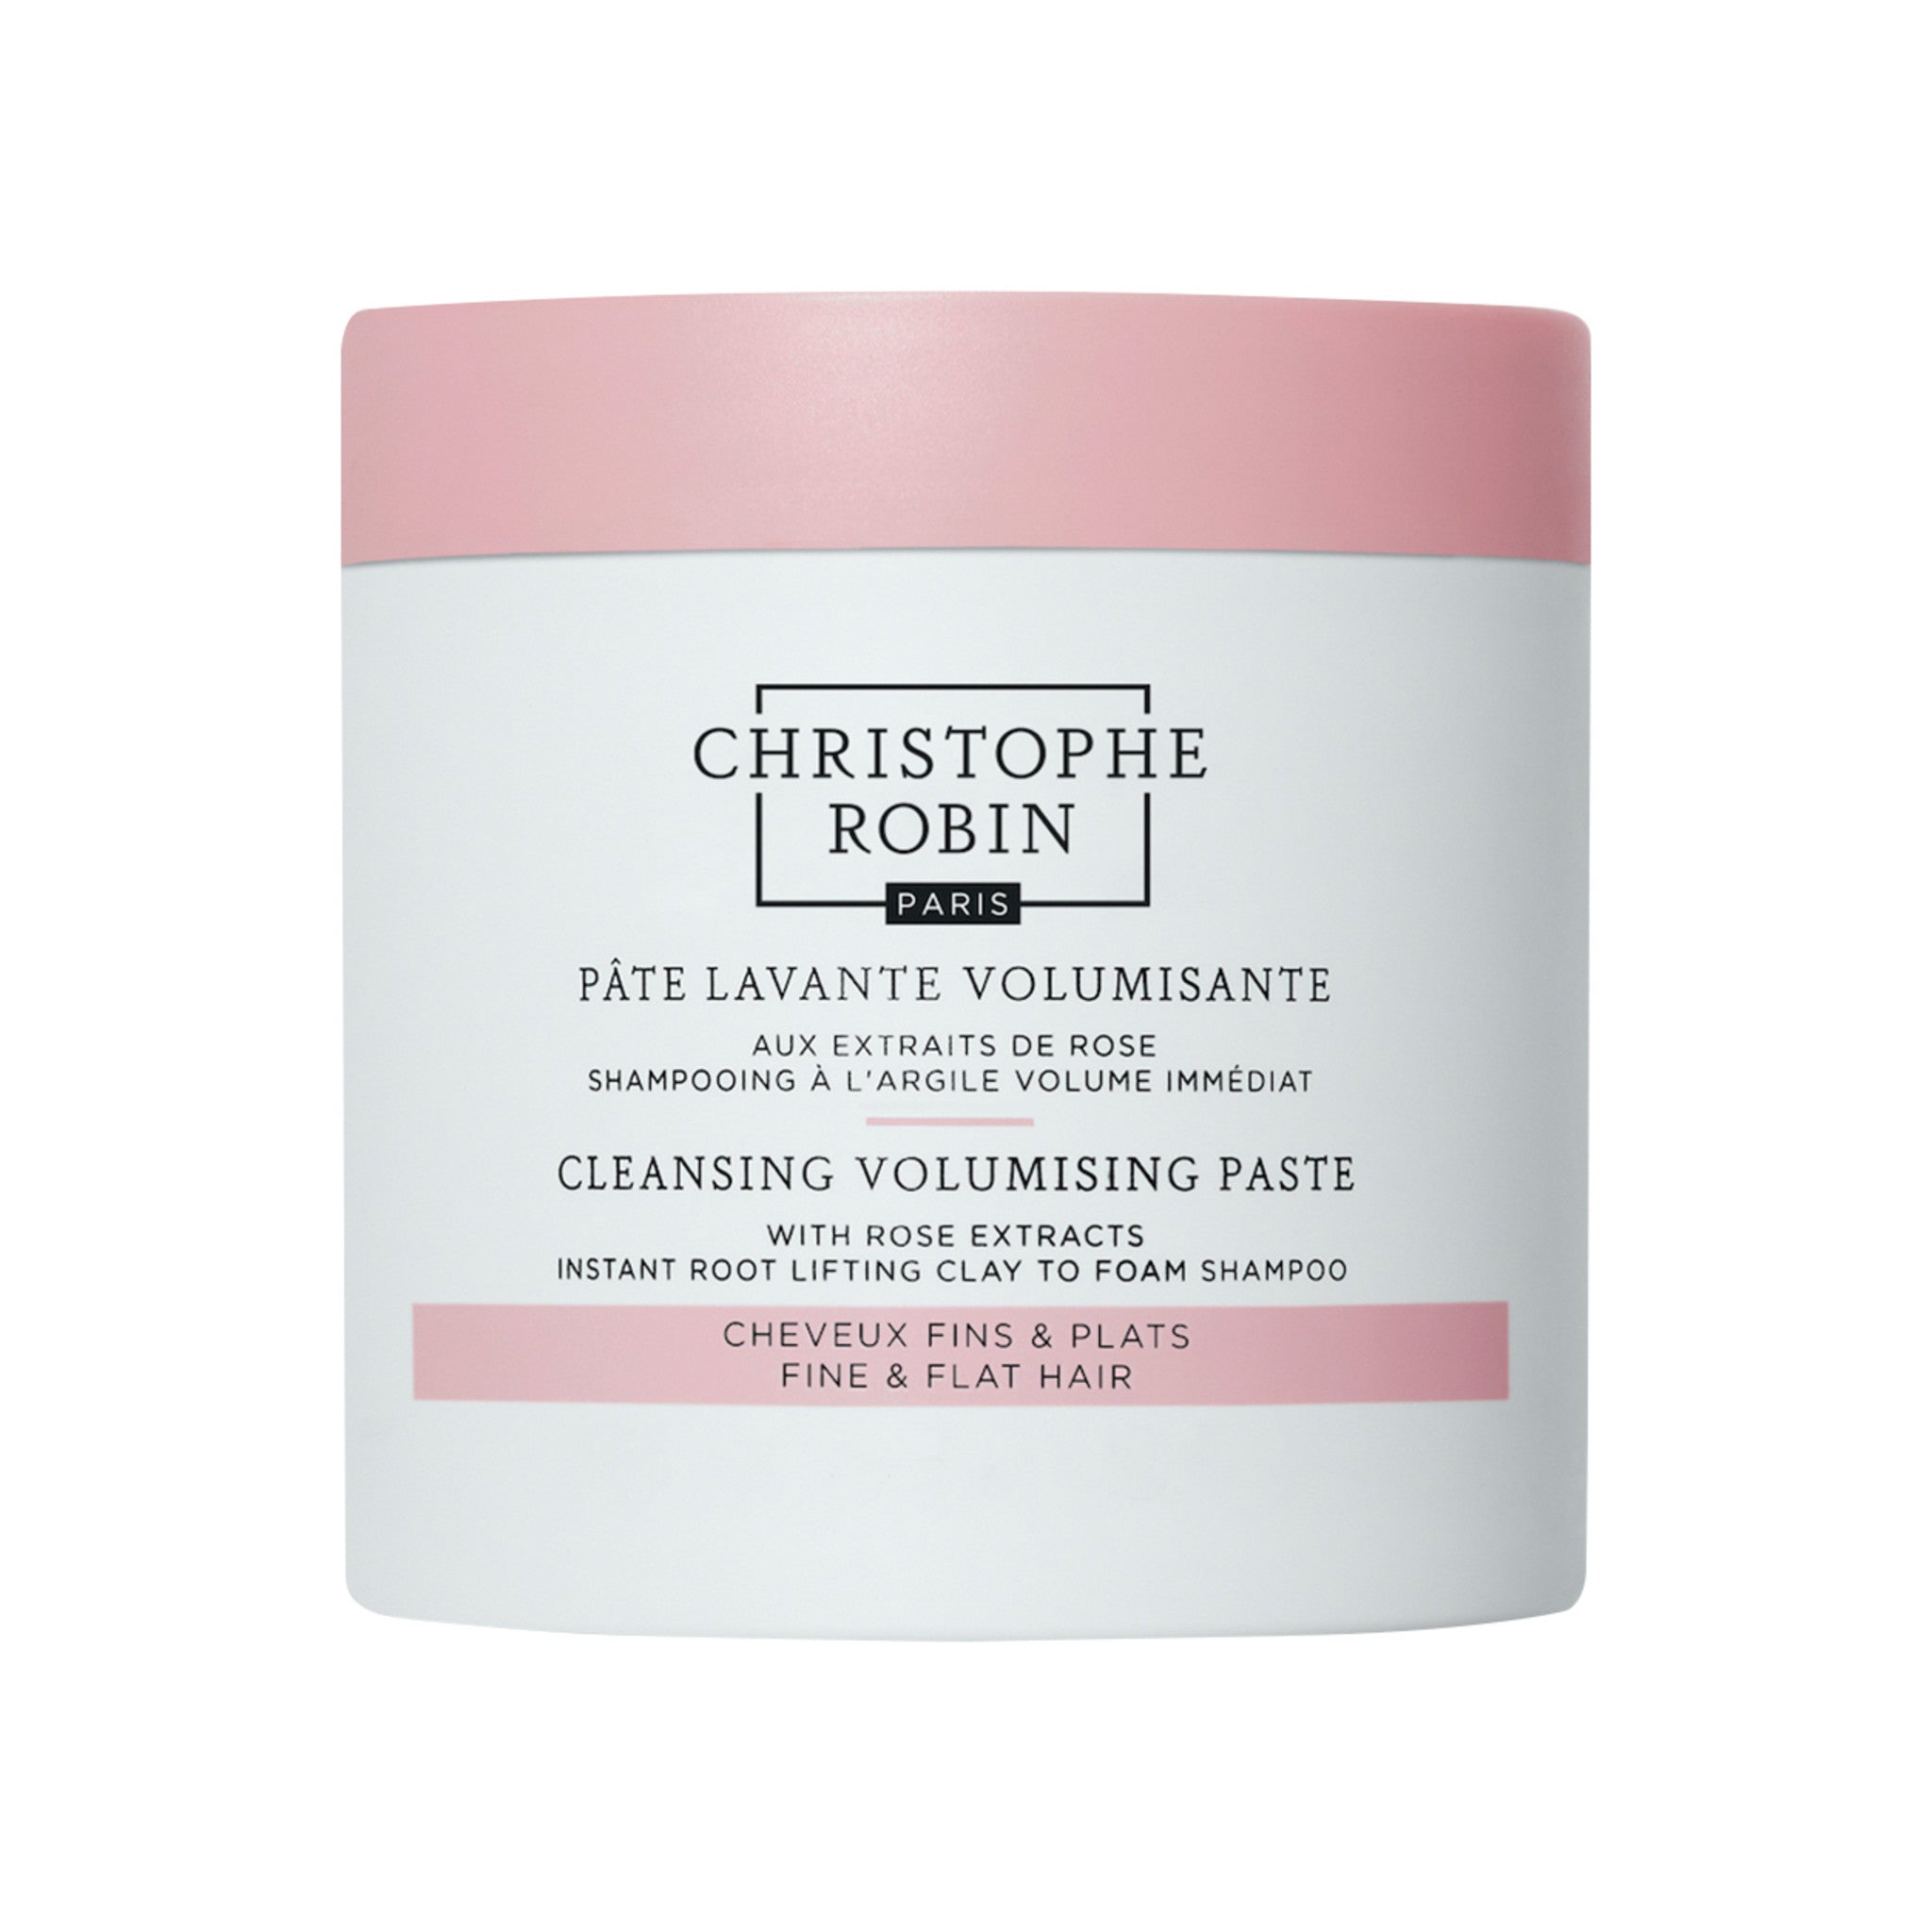 Christophe Robin Cleansing Volumizing Paste With Pure Rassoul Clay And Rose Extracts Size variant: 8.4 fl oz | 250 ml main image.